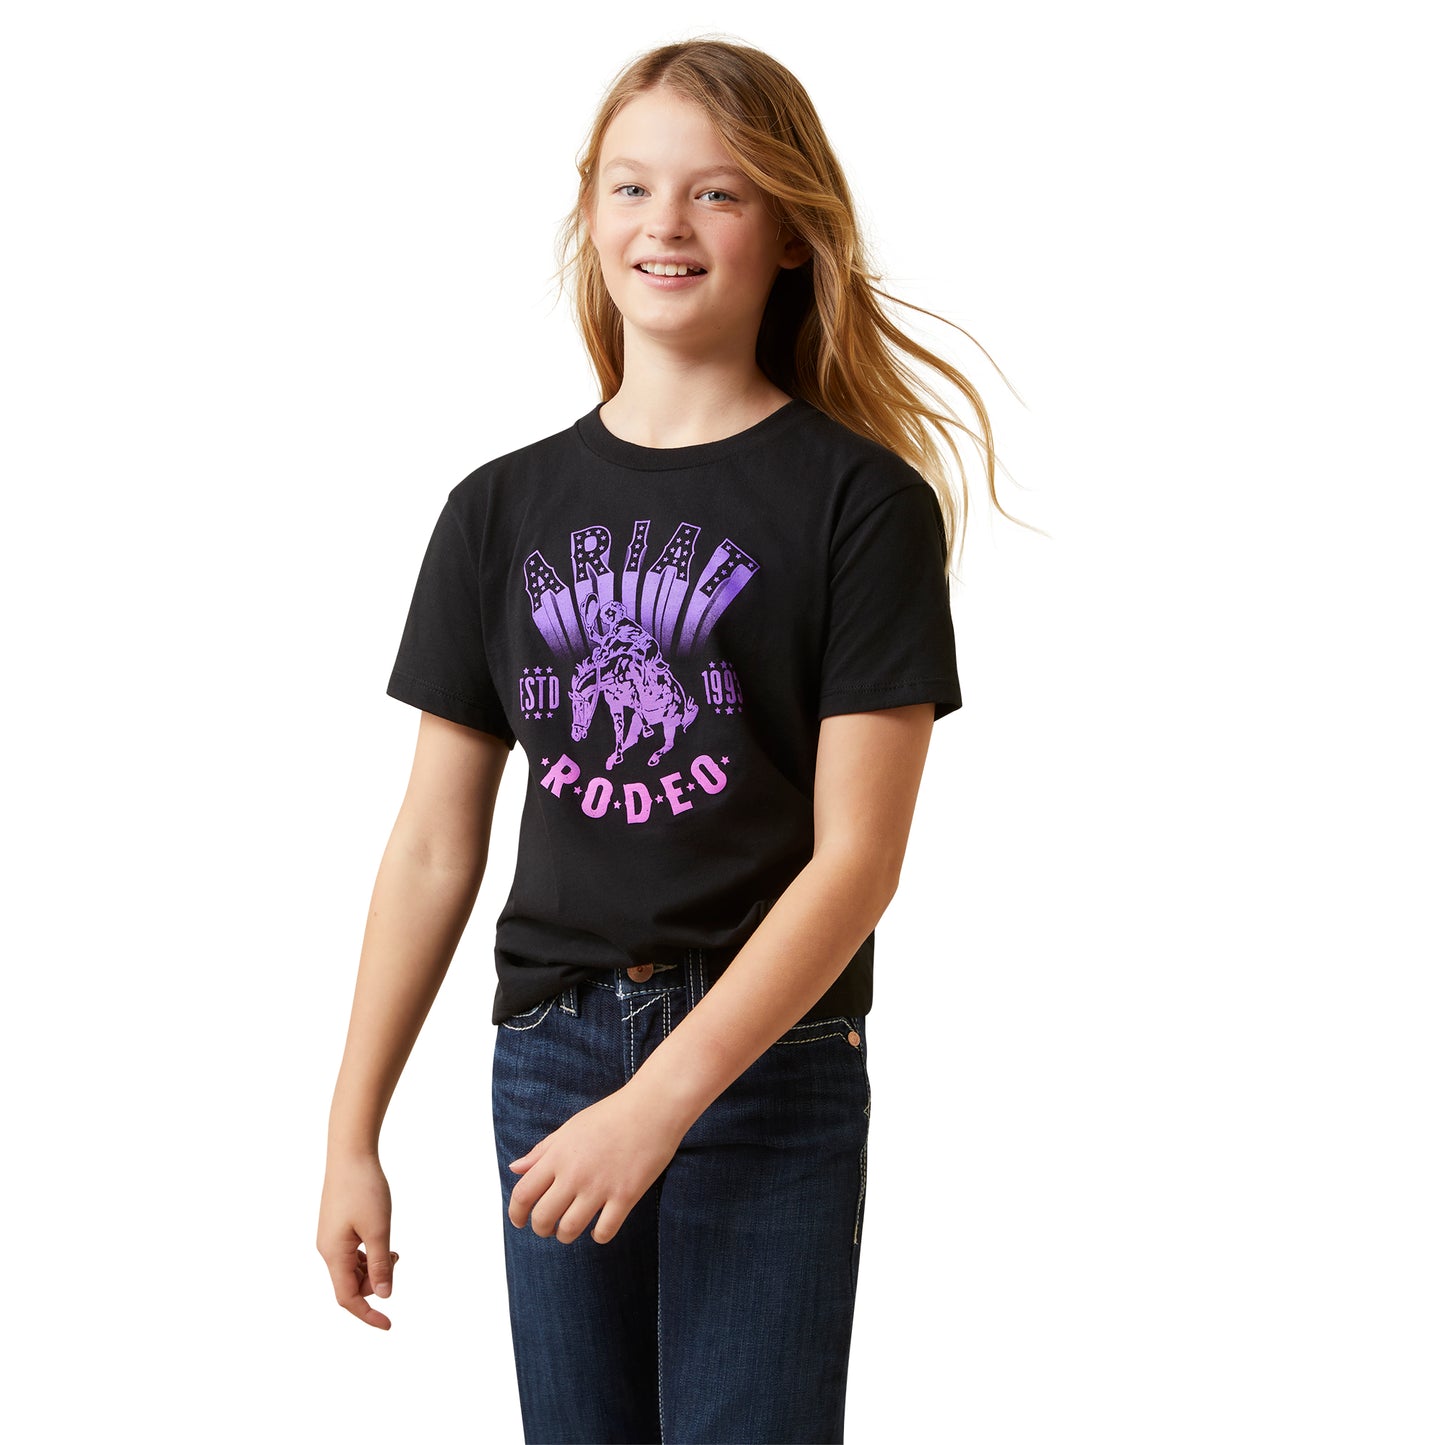 Ariat® Girl's Vintage Rodeo Black Graphic T-Shirt 10044609